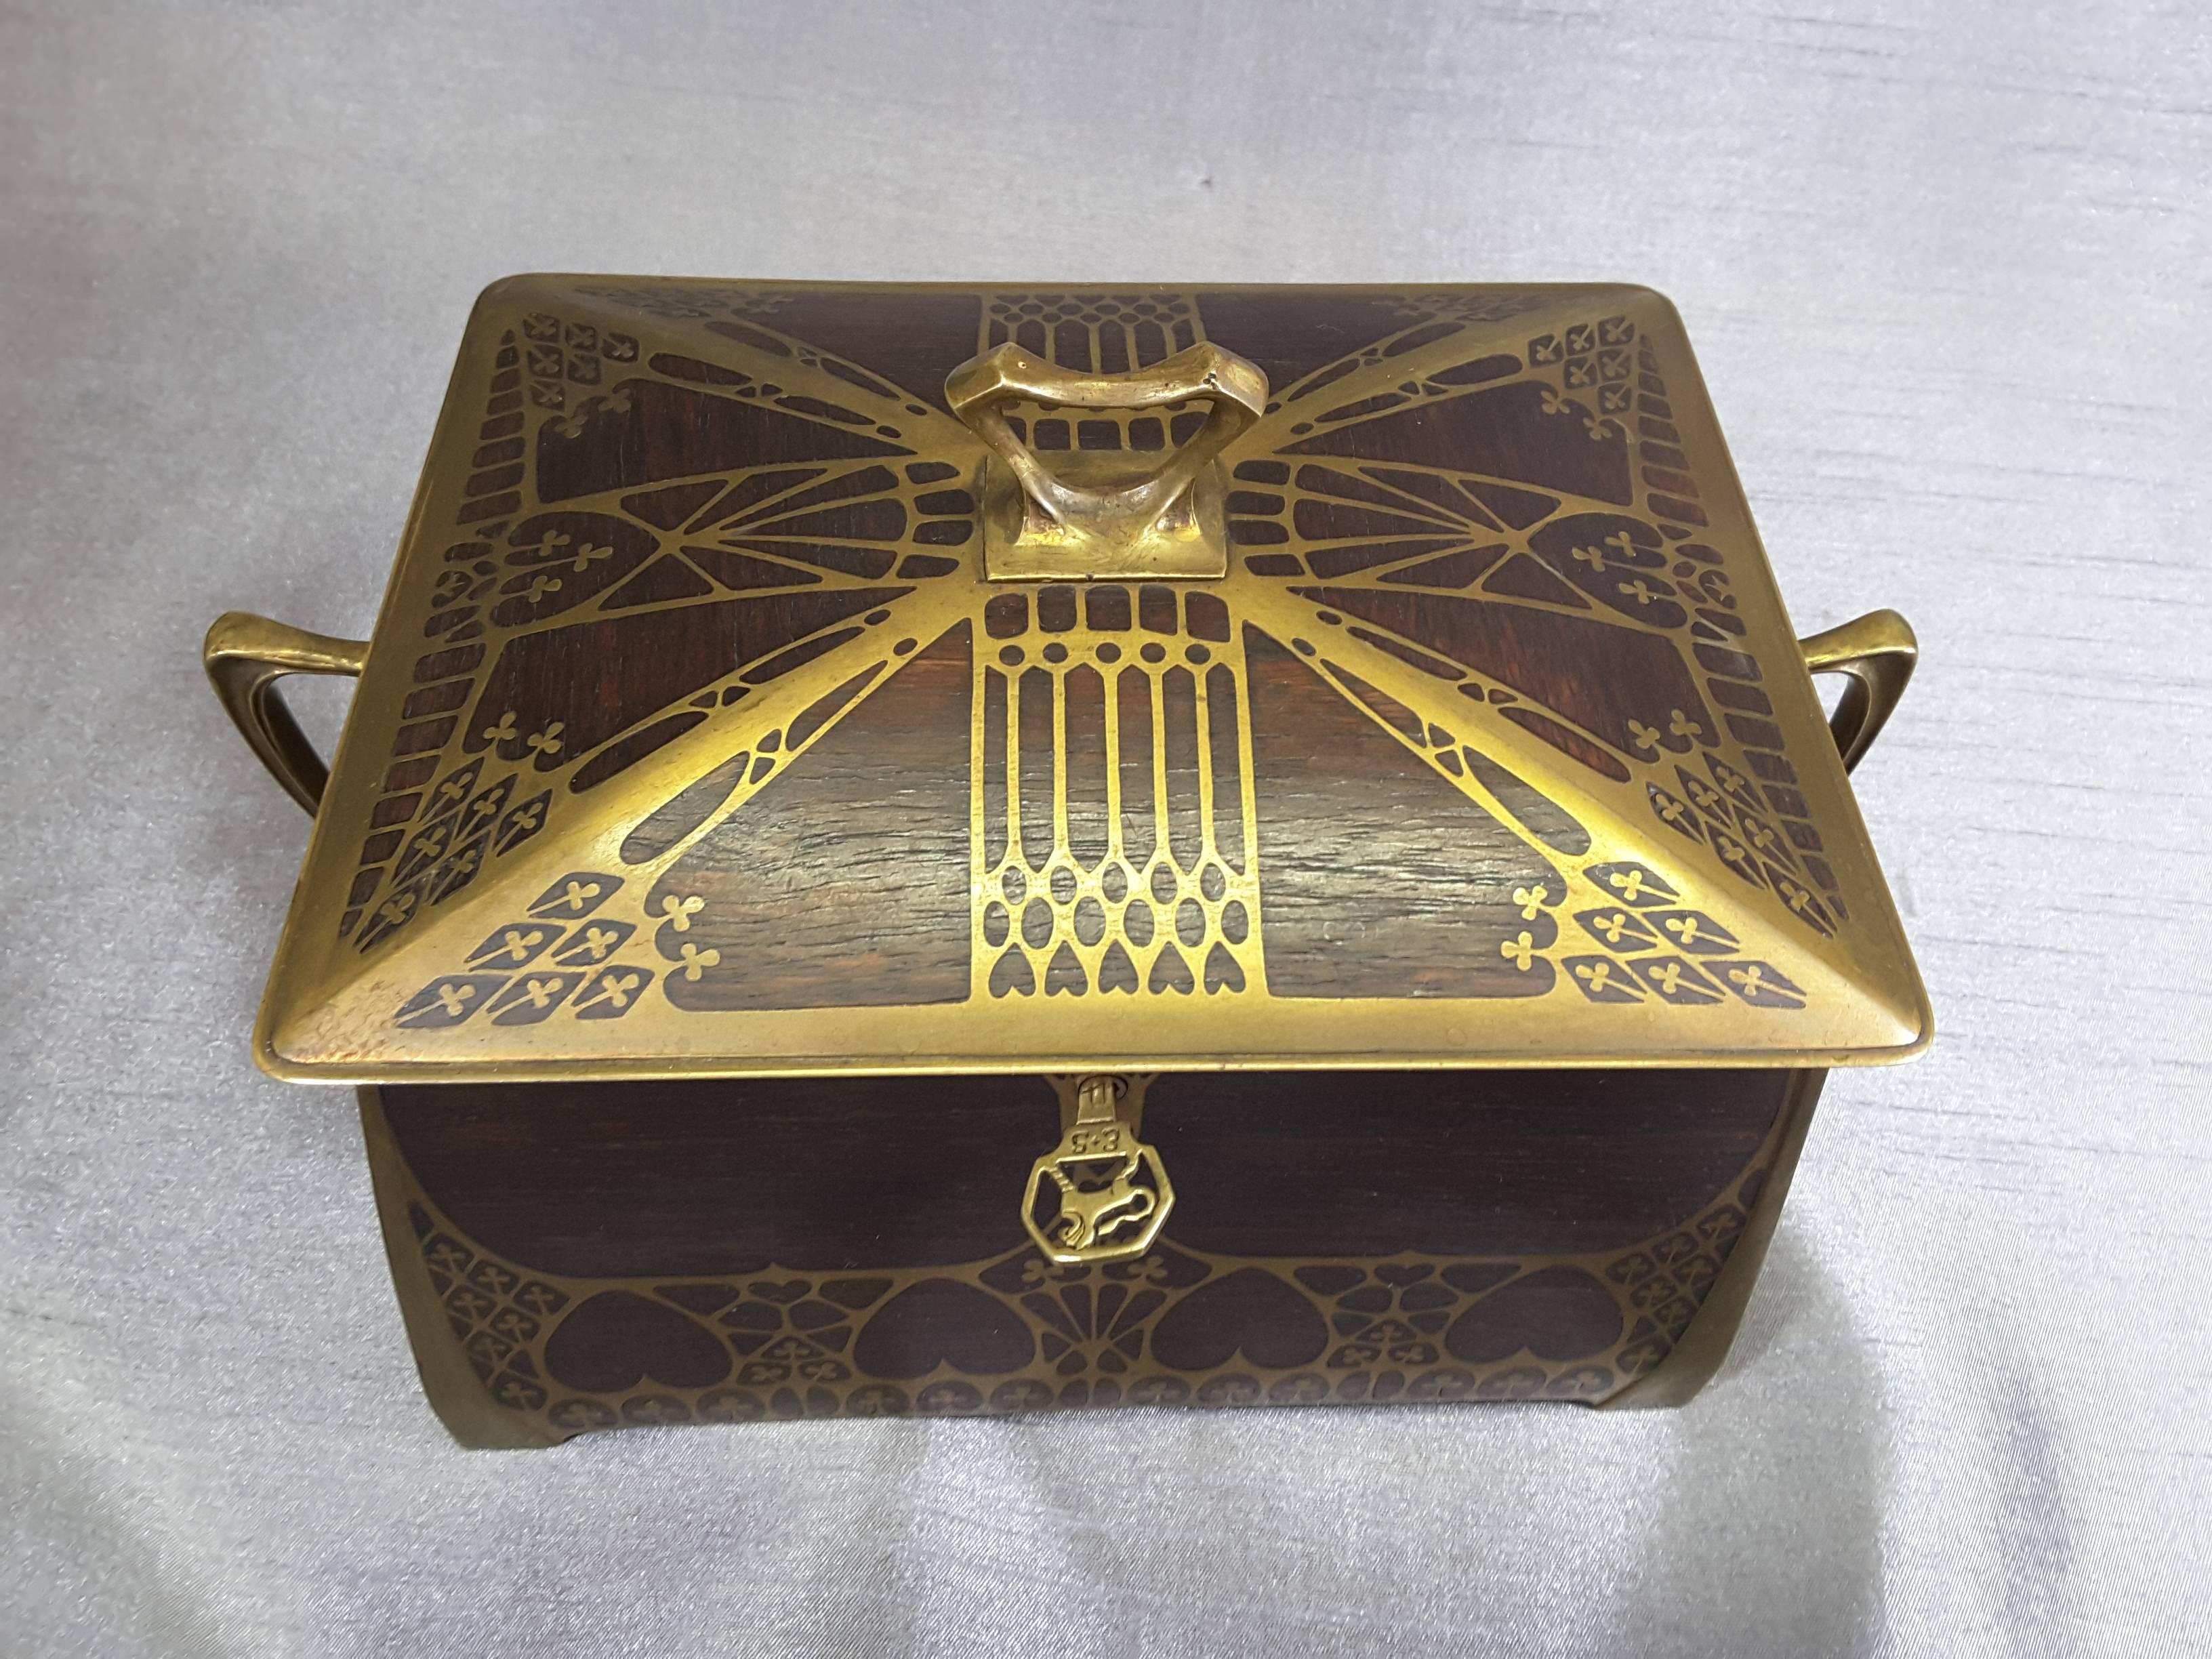 Erhard & Sohne (Erhard & Sons) Secession/Art Nouveau jewelry casket or box done in rosewood and brass, velvet lined interior. The casket is decorated with inverted hearts and clover leaves, brass has a nice patina, rosewood is in nice condition. The